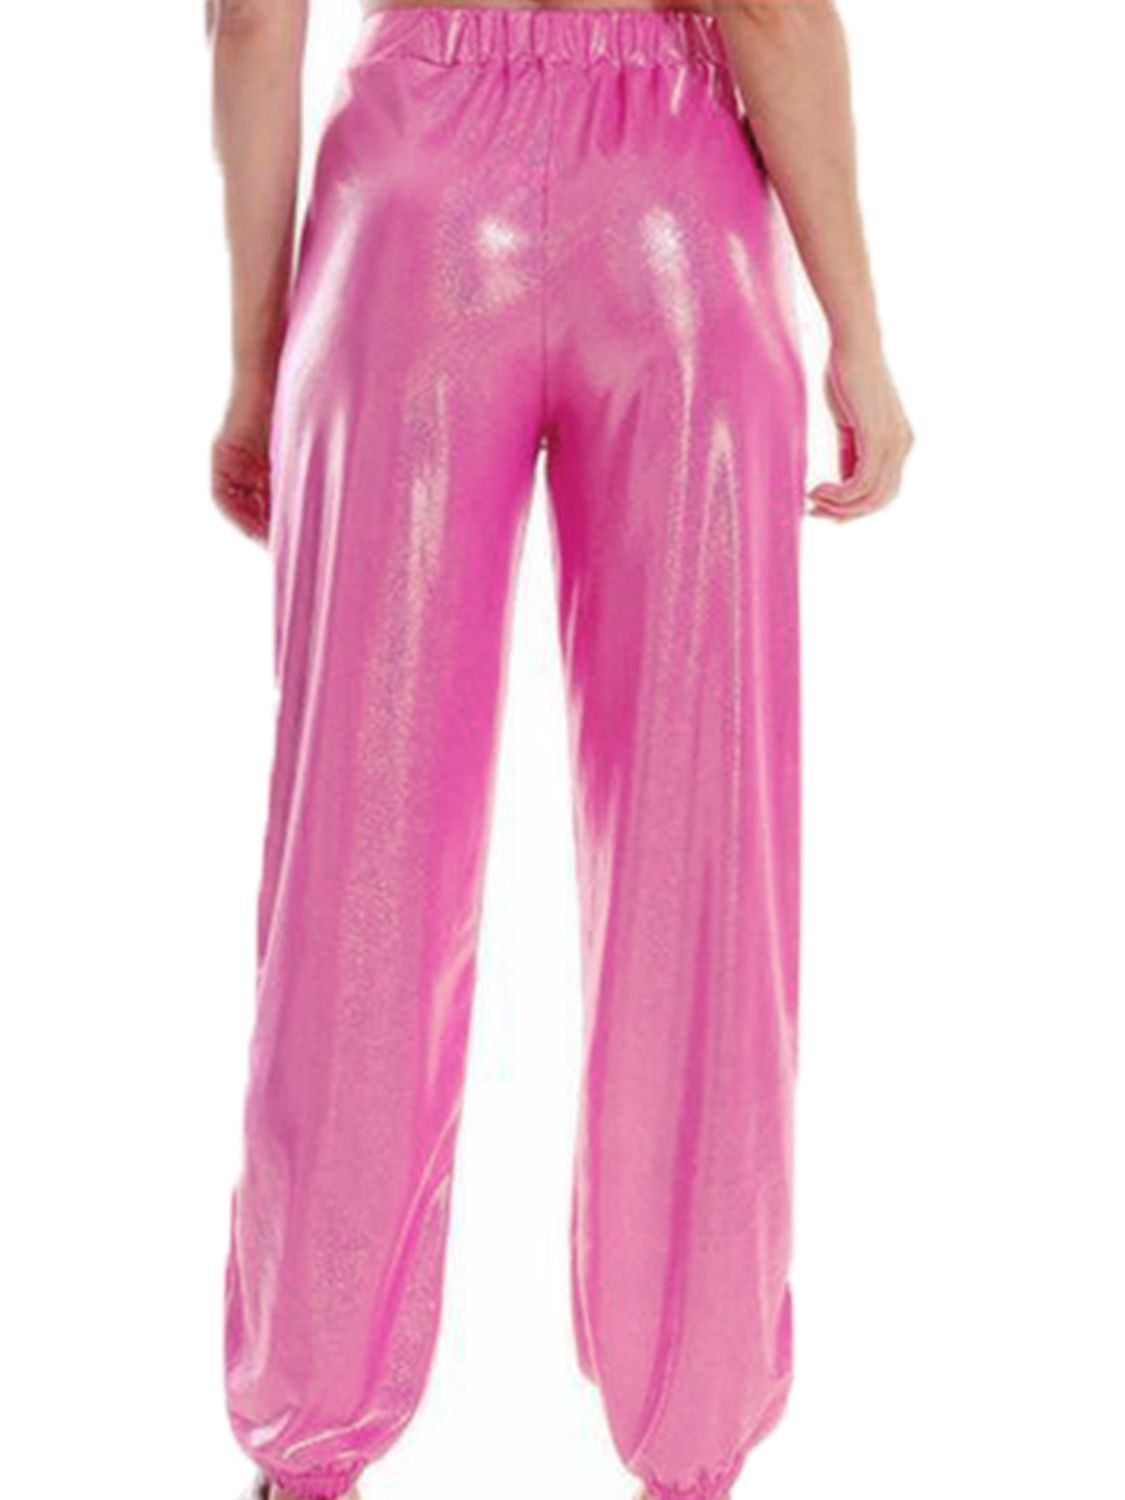 Glitter Elastic Waist Pants with Pockets in Dark Grey or Fuchsia in Size S, M, L, or XL